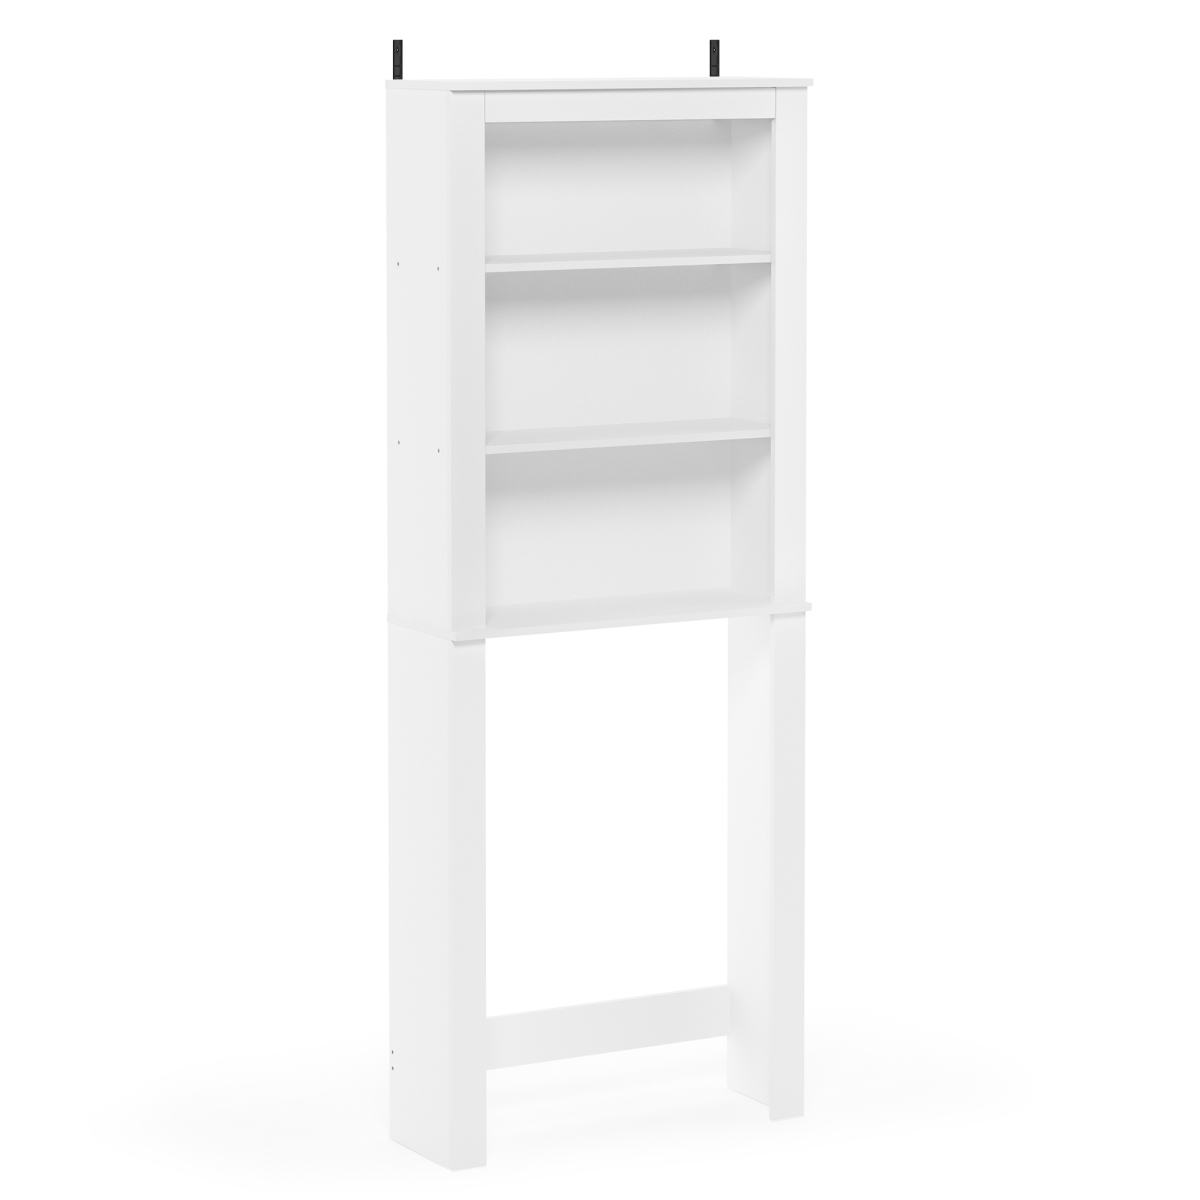 Fr18513wh Indo Open Bath Cabinet - White - 62.99 X 23.62 X 8.27 In.